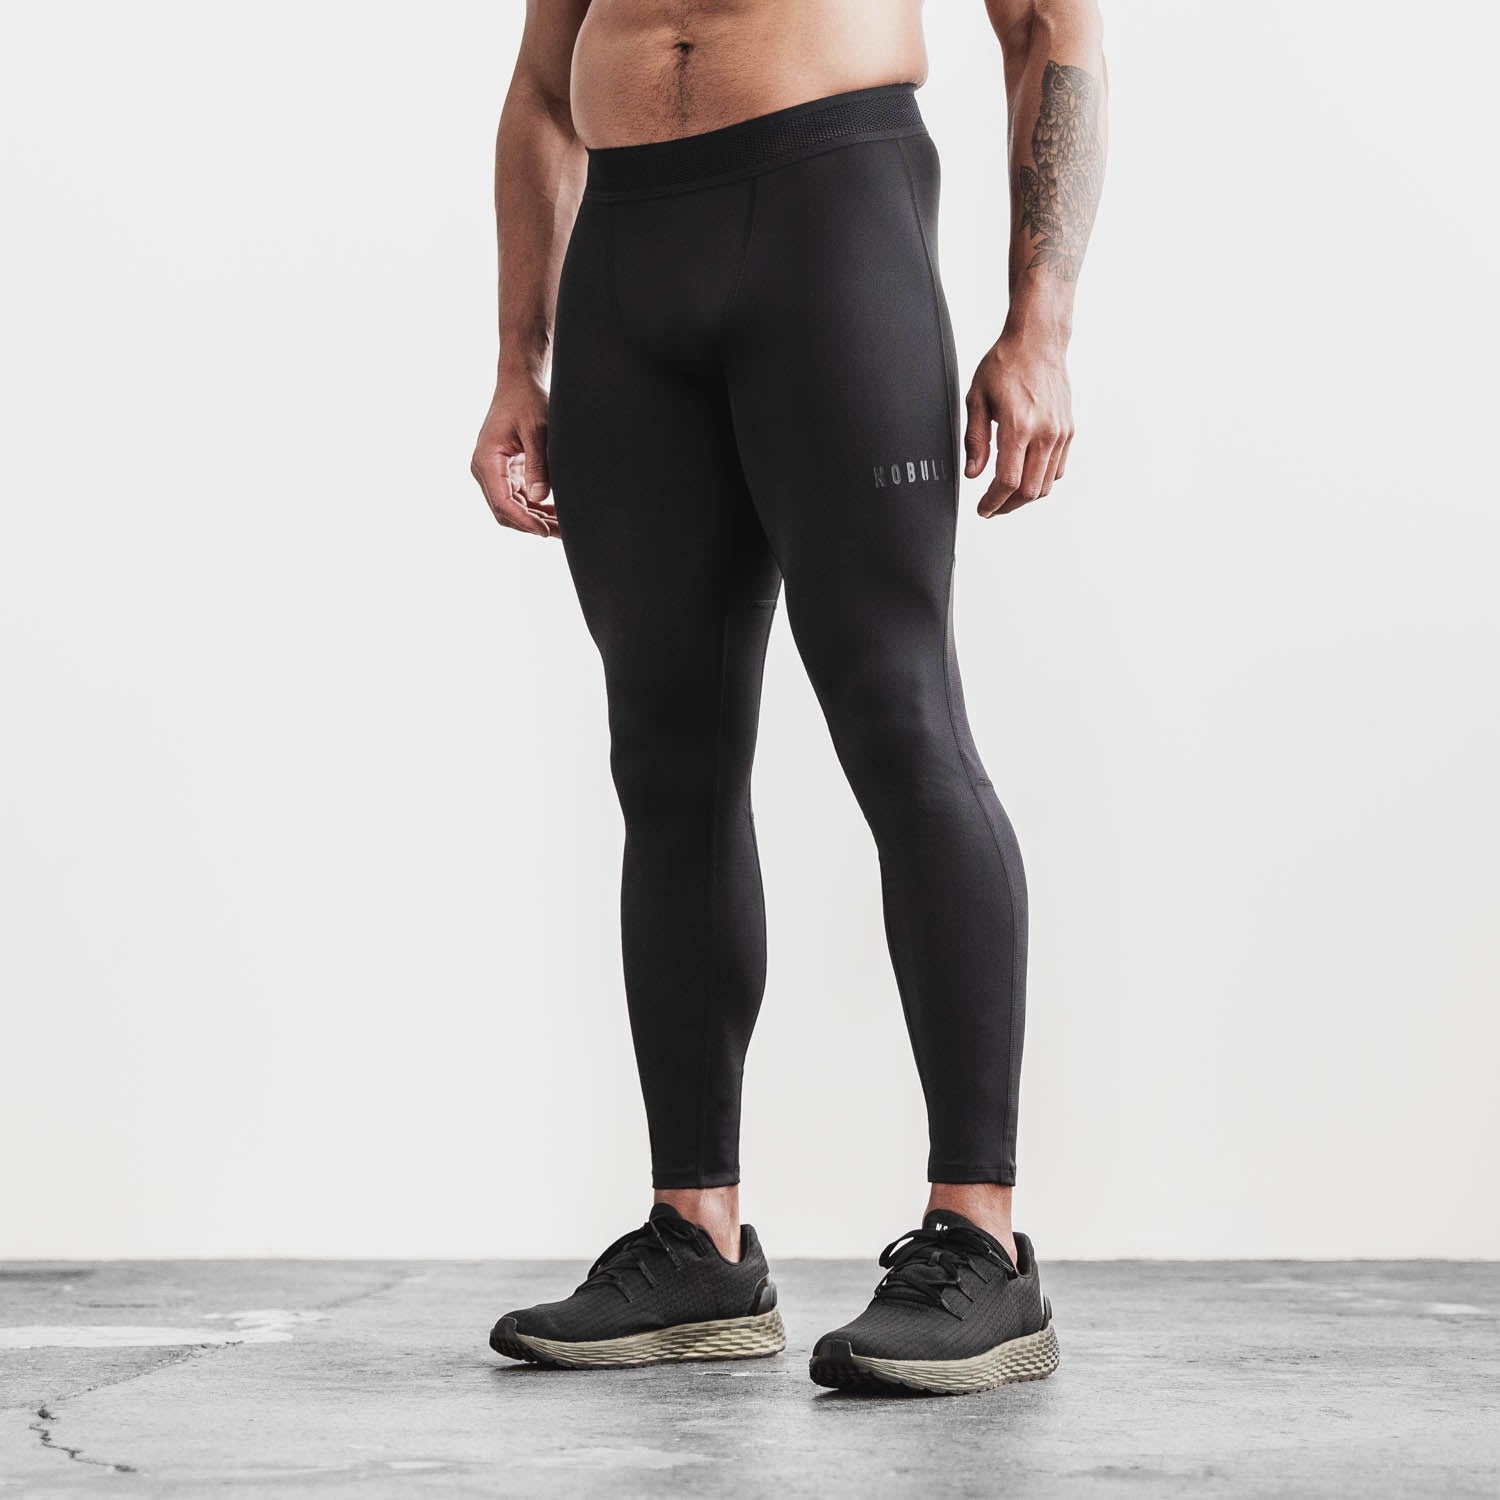 MEN'S MIDWEIGHT COMPRESSION TIGHT 27, BLACK